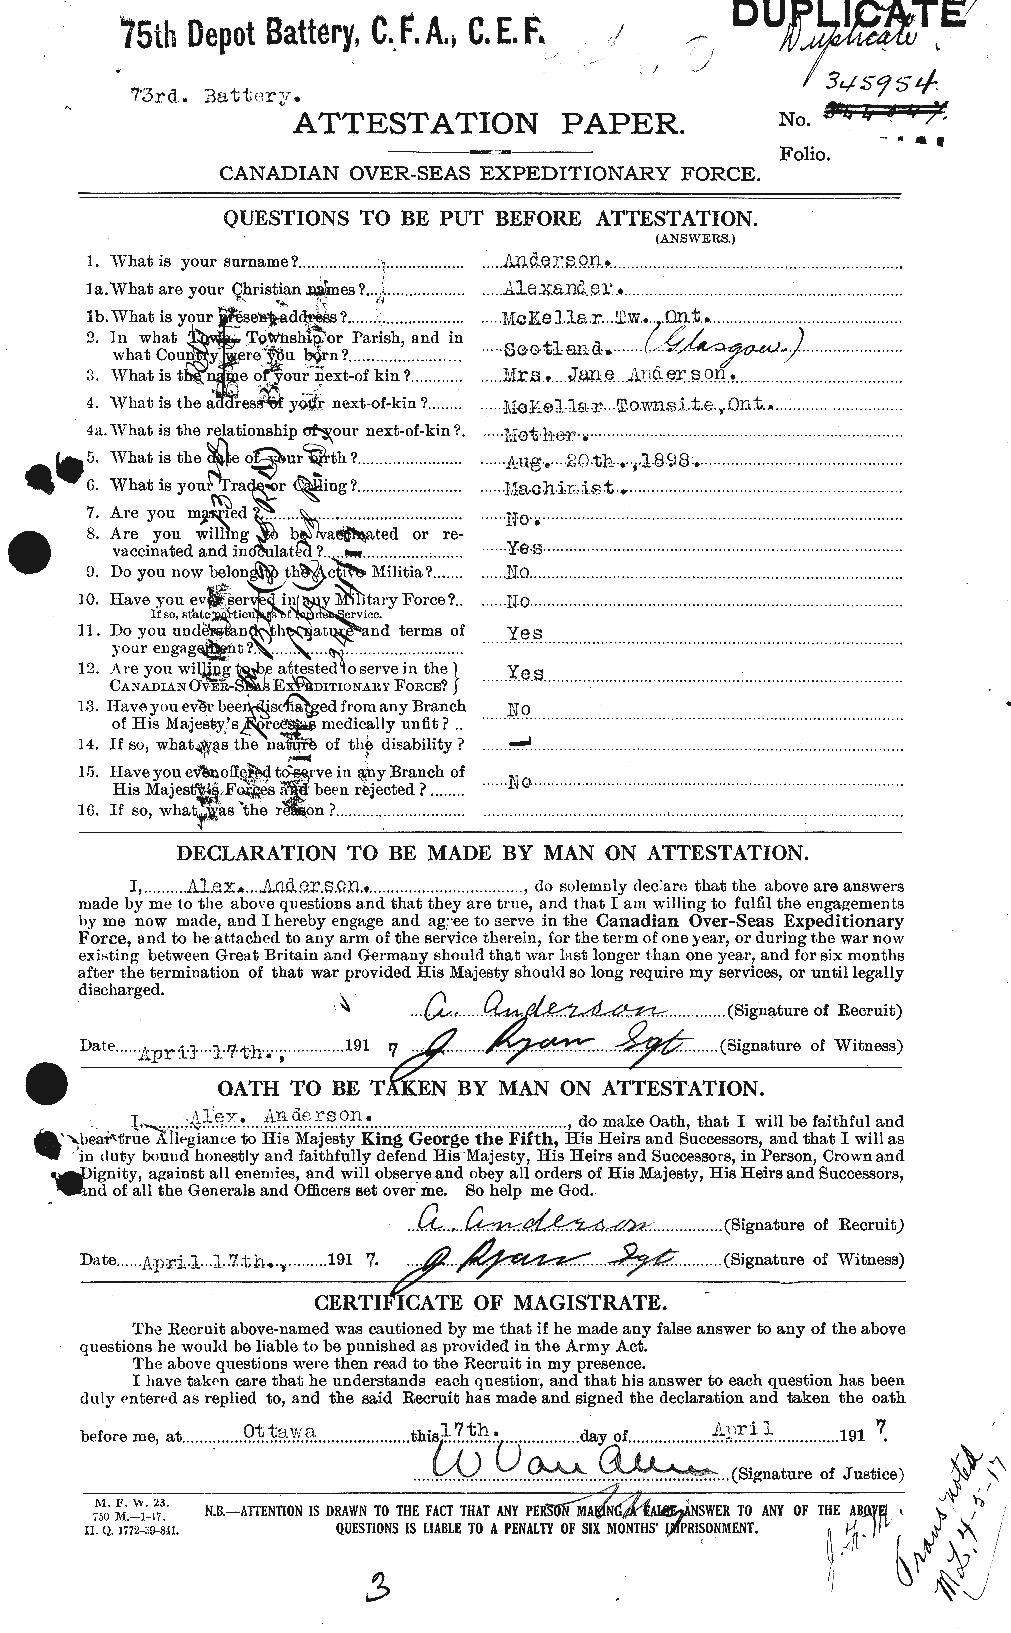 Personnel Records of the First World War - CEF 209508a